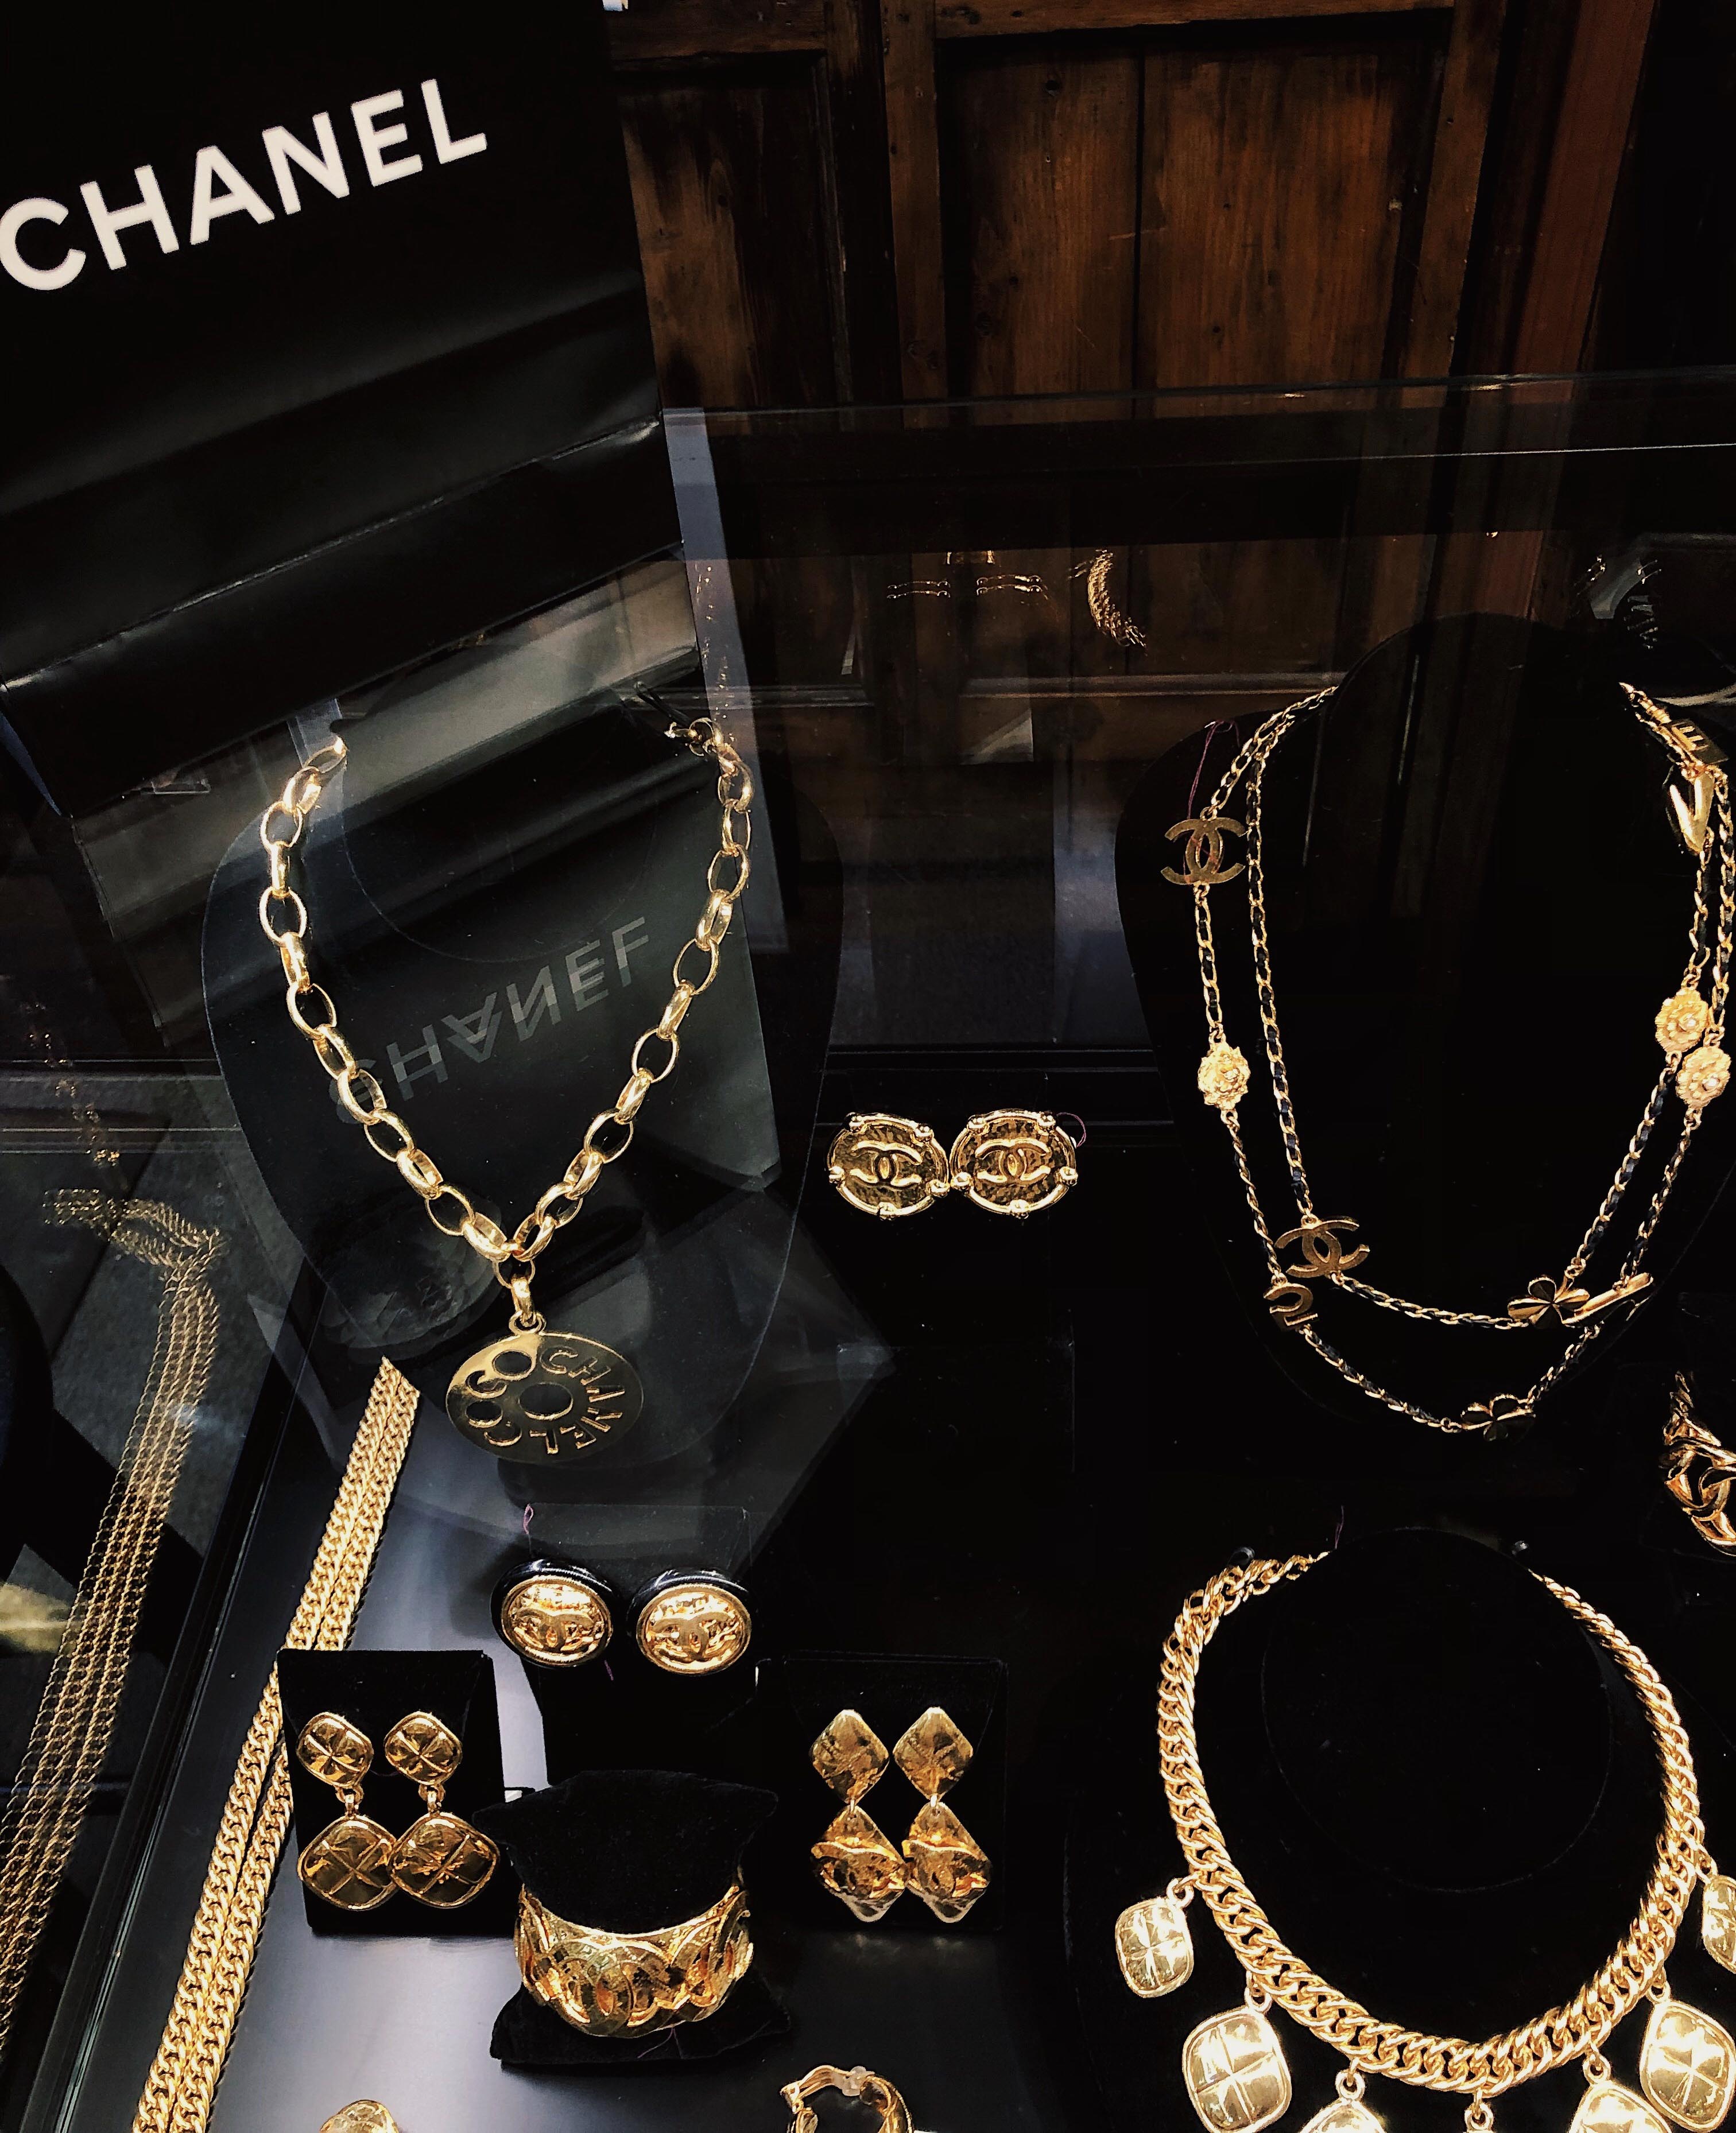 Vintage shopping in New Orleans - Chanel Vintage jewelry at Vintage 329 at Royal Street French Quarter - New Orleans Travel Guide - NOLA City guide - by fashion blogger Julia Comil